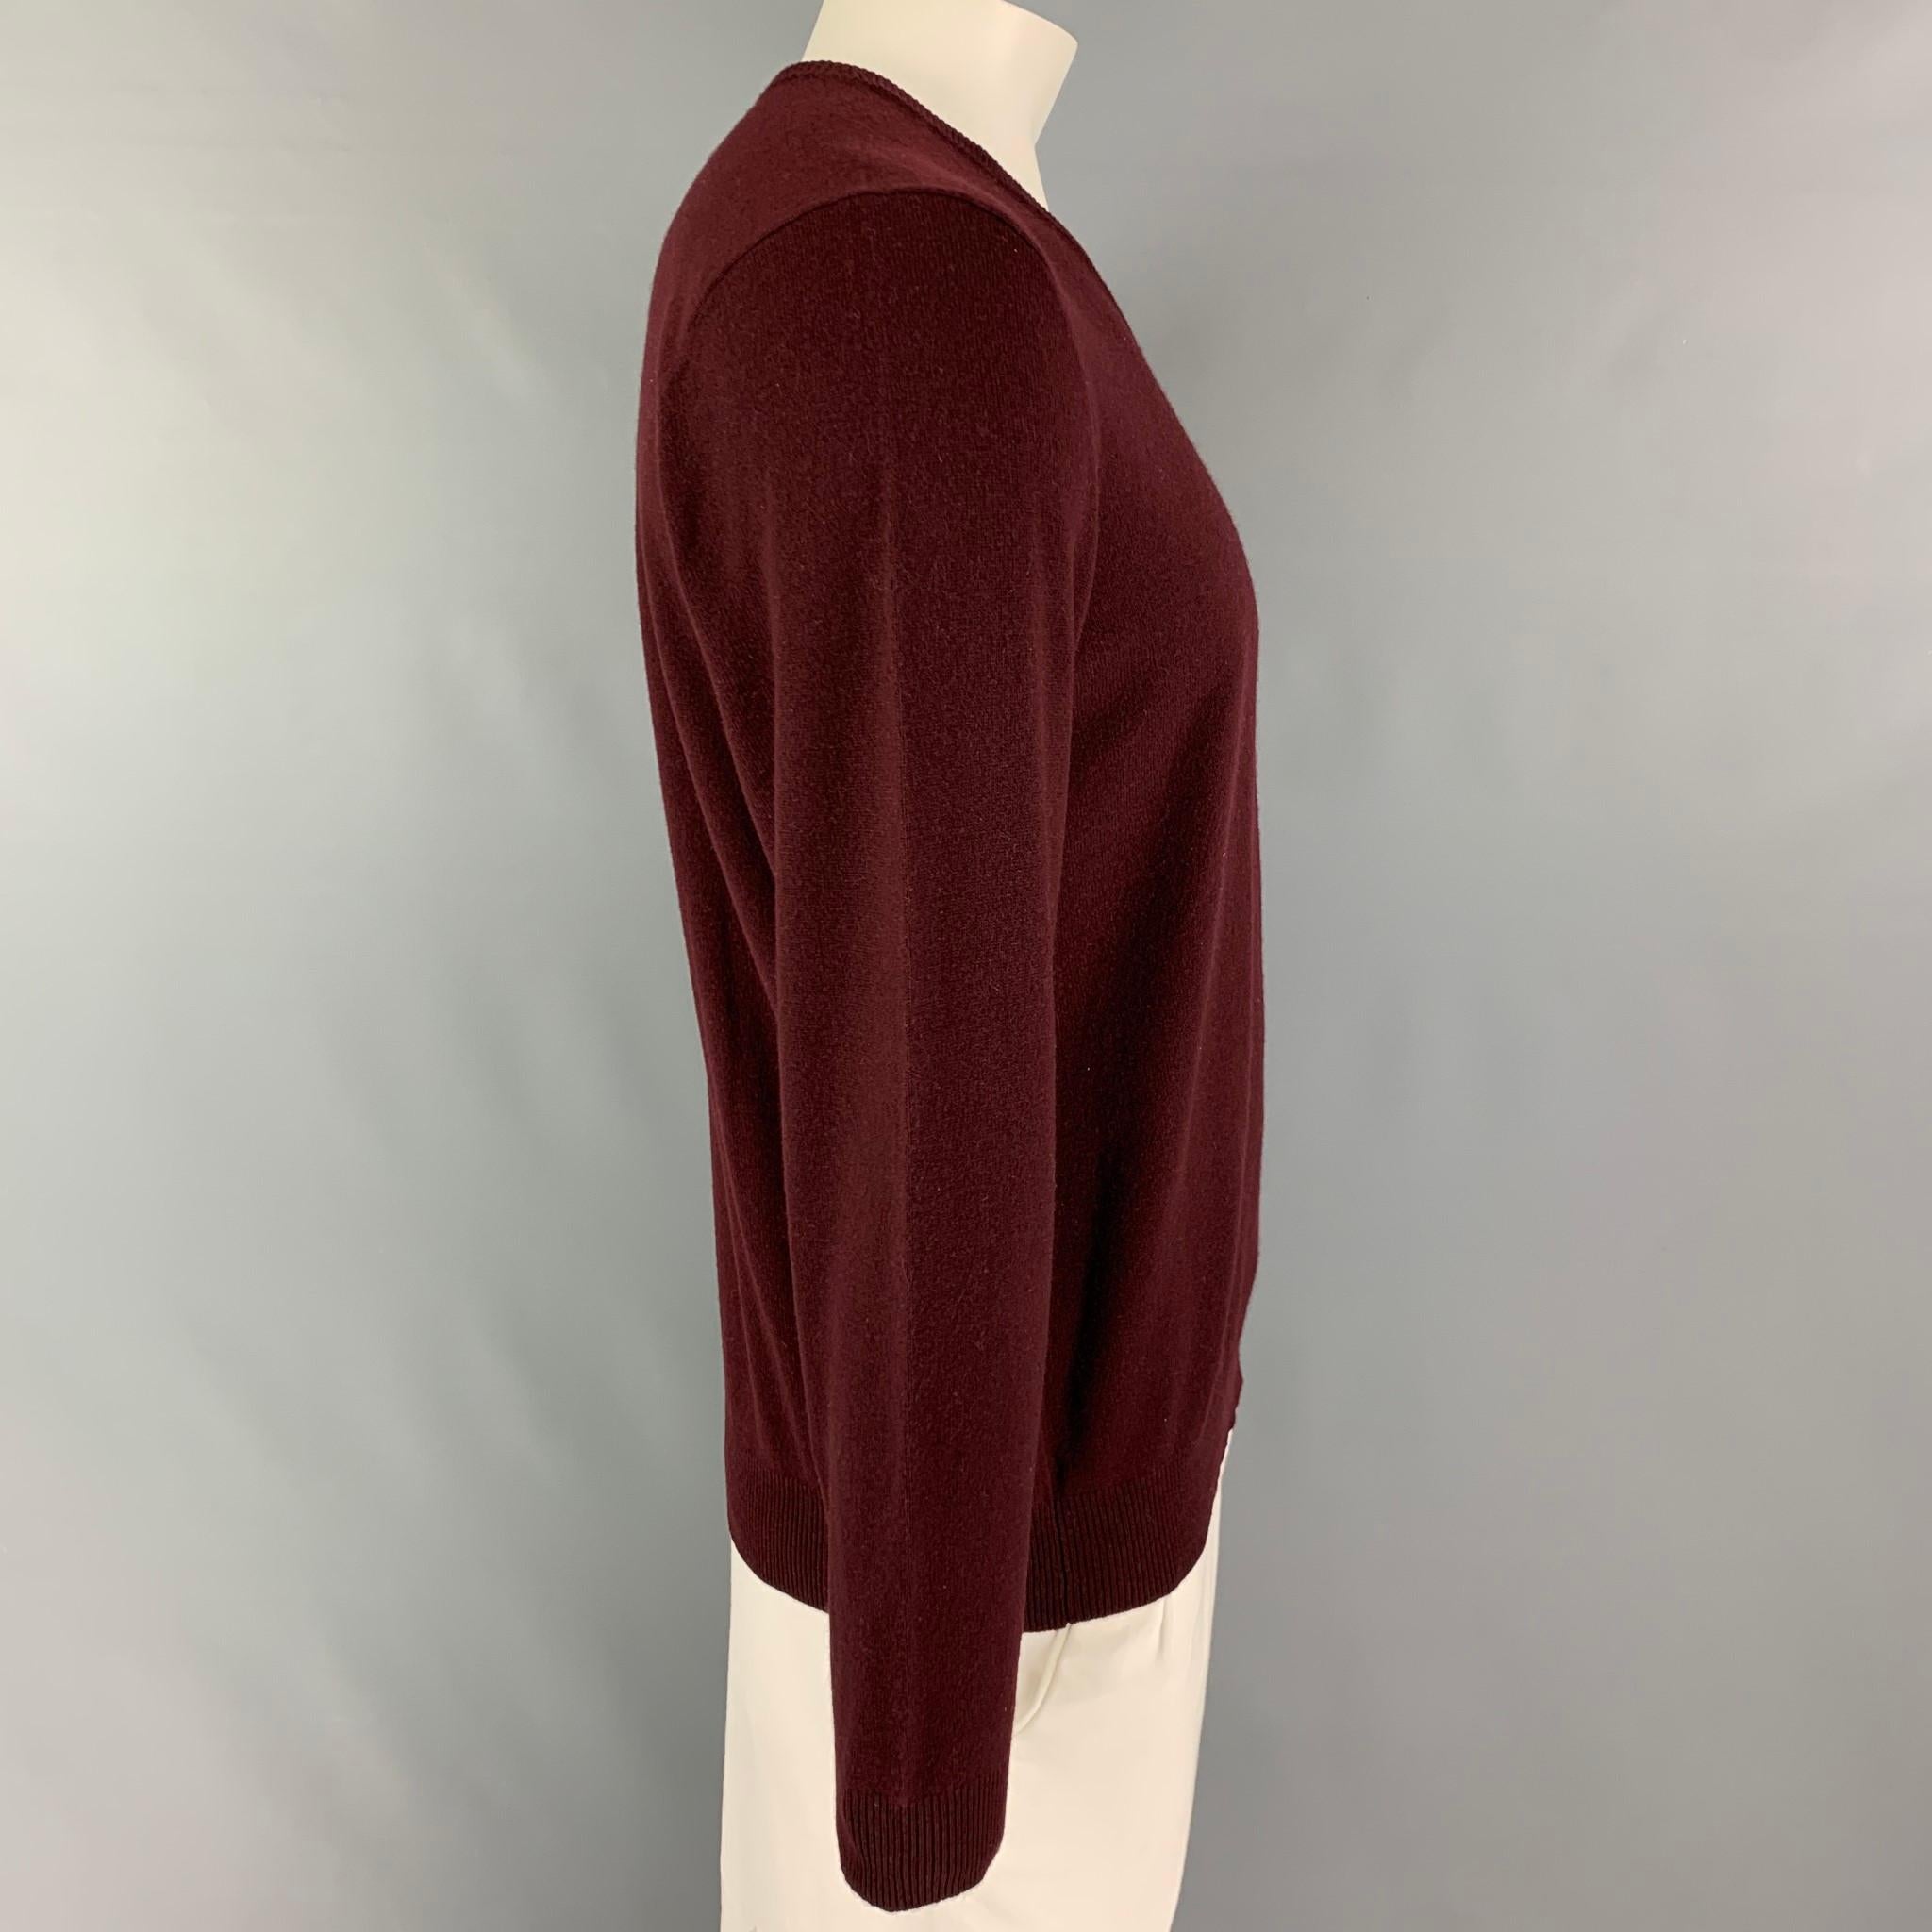 POLO by RALPH LAUREN sweater comes in a burgundy cashmere featuring a v-neck. 

New with tags.
Marked: L
Original Retail Price: $395.00

Measurements:

Shoulder: 19.5 in.
Chest: 42 in.
Sleeve: 27 in.
Length: 26 in. 